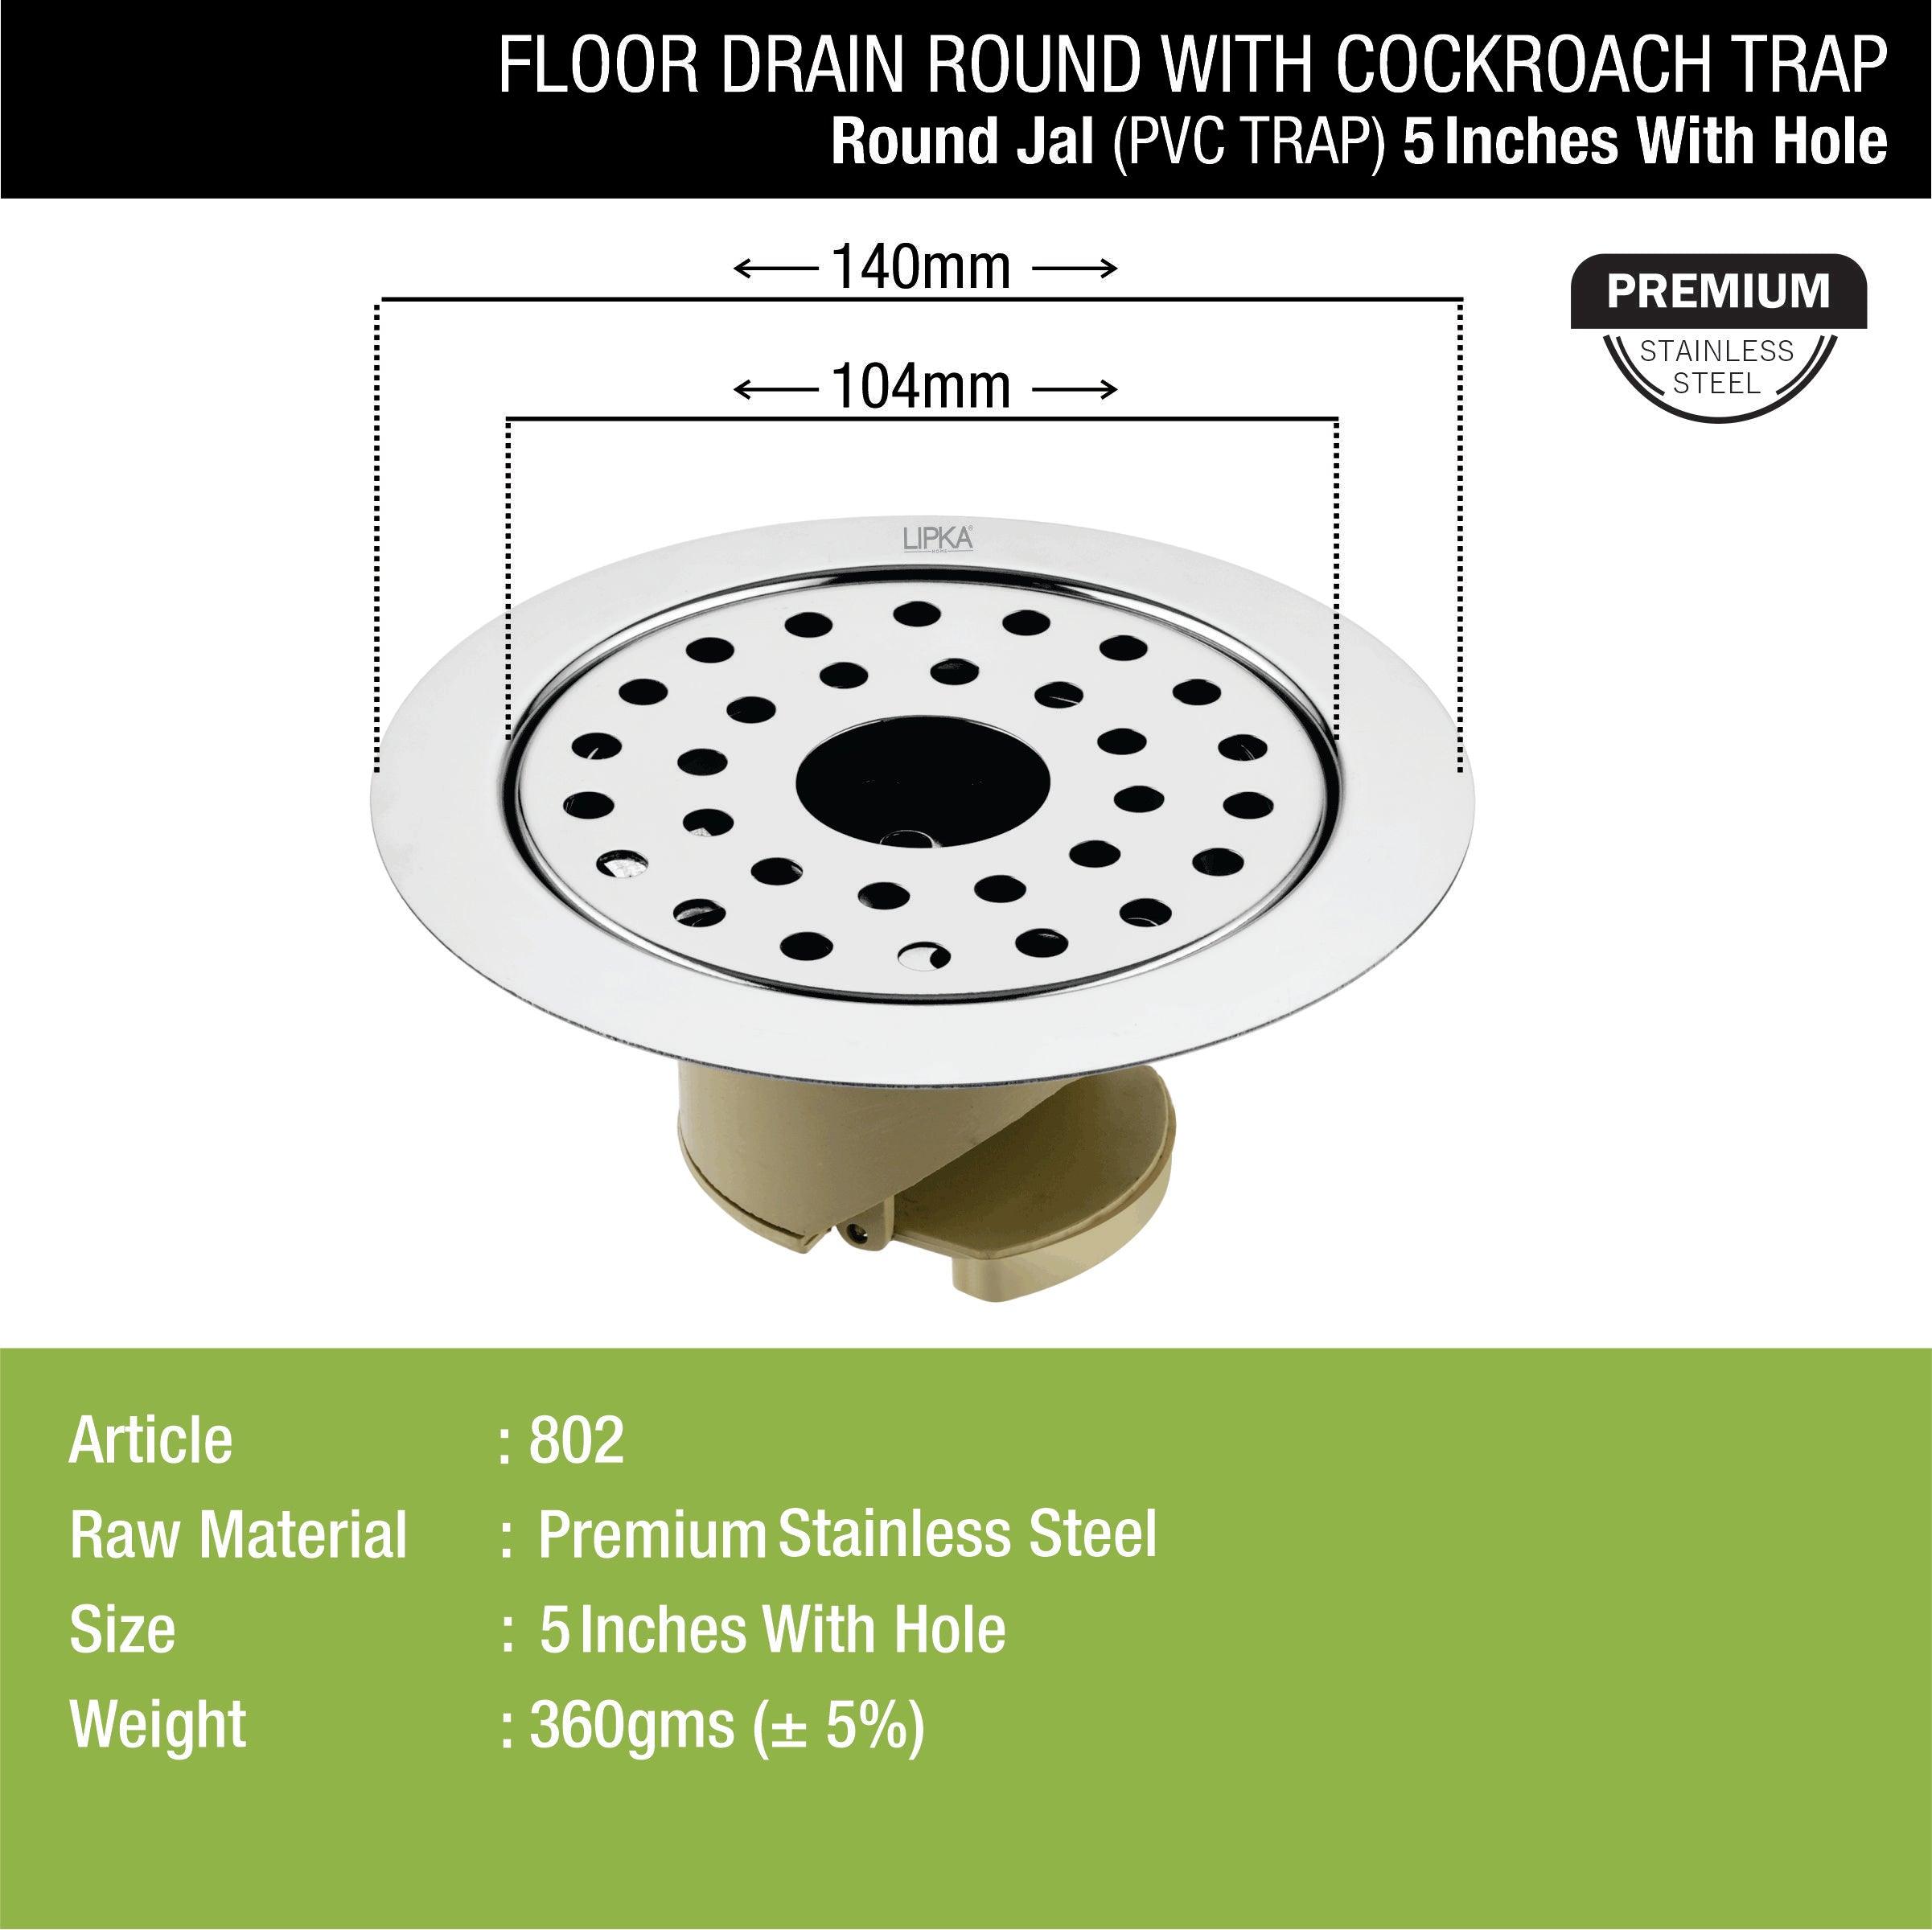 Round Jal Floor Drain (5 Inches) with Hole and Wide PVC Cockroach Trap dimensions and sizes